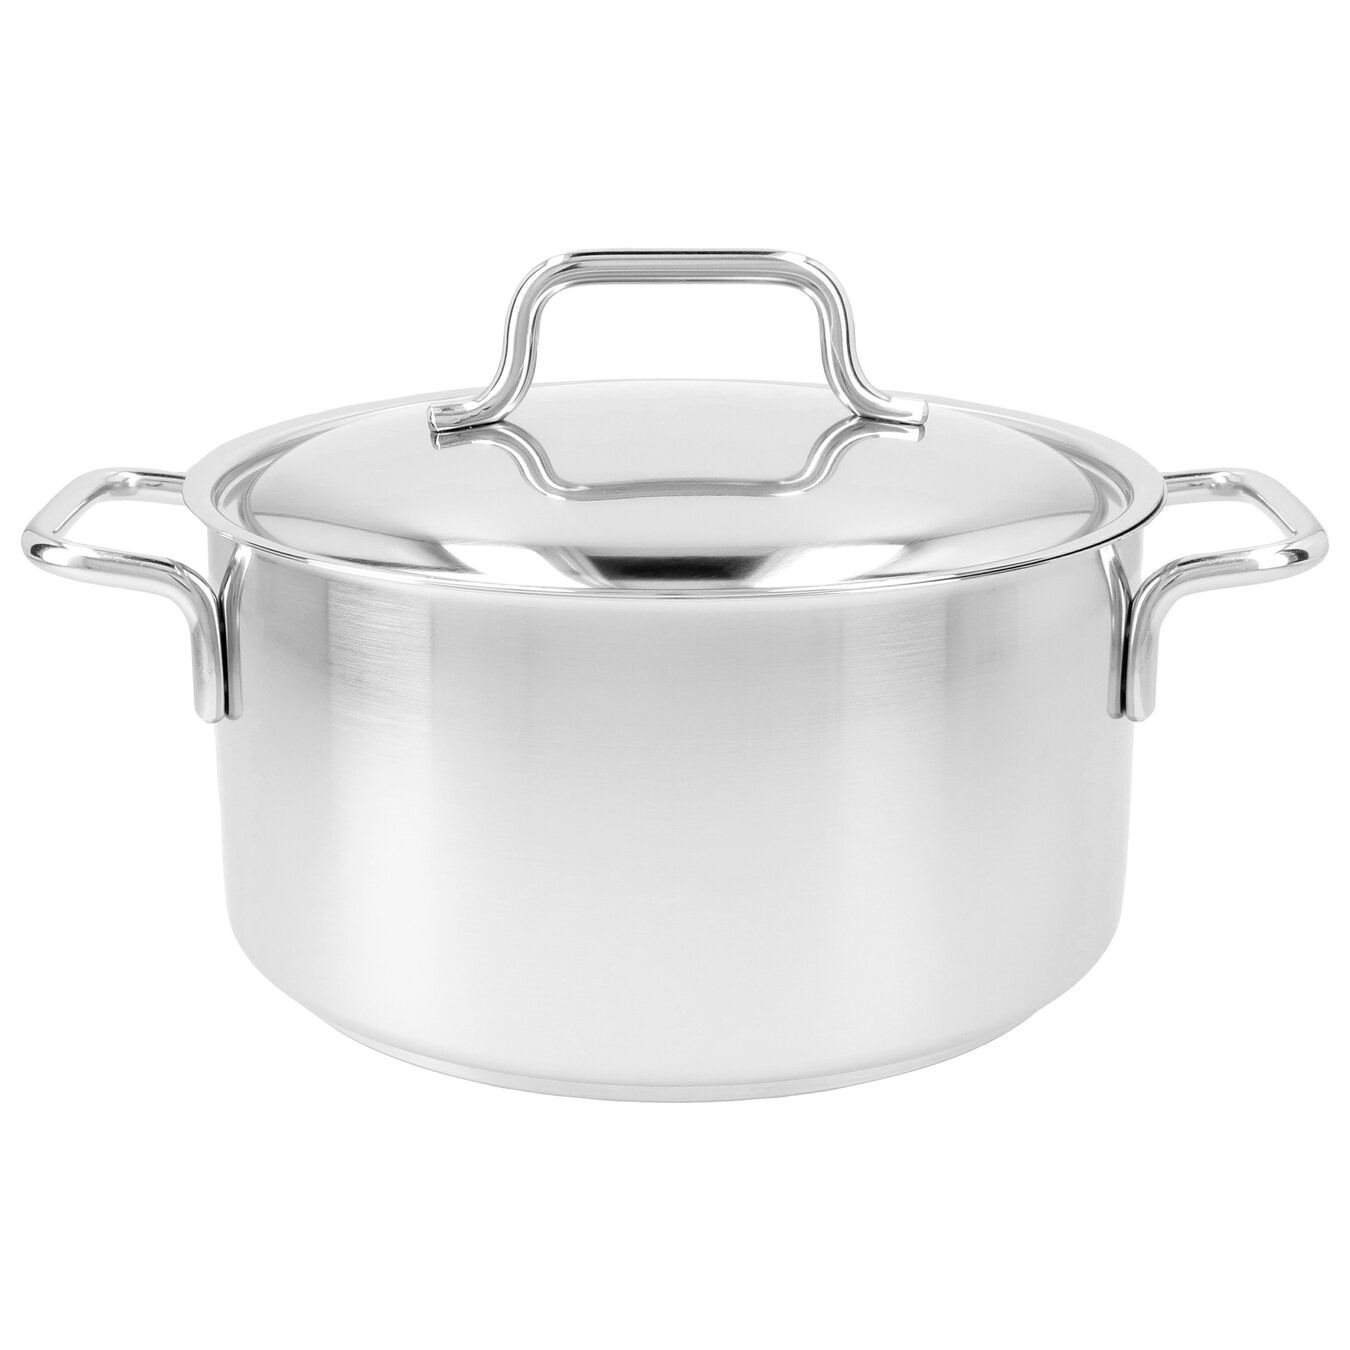 Saucepan with lid, 20 cm /3 l, Apollo, stainless steel